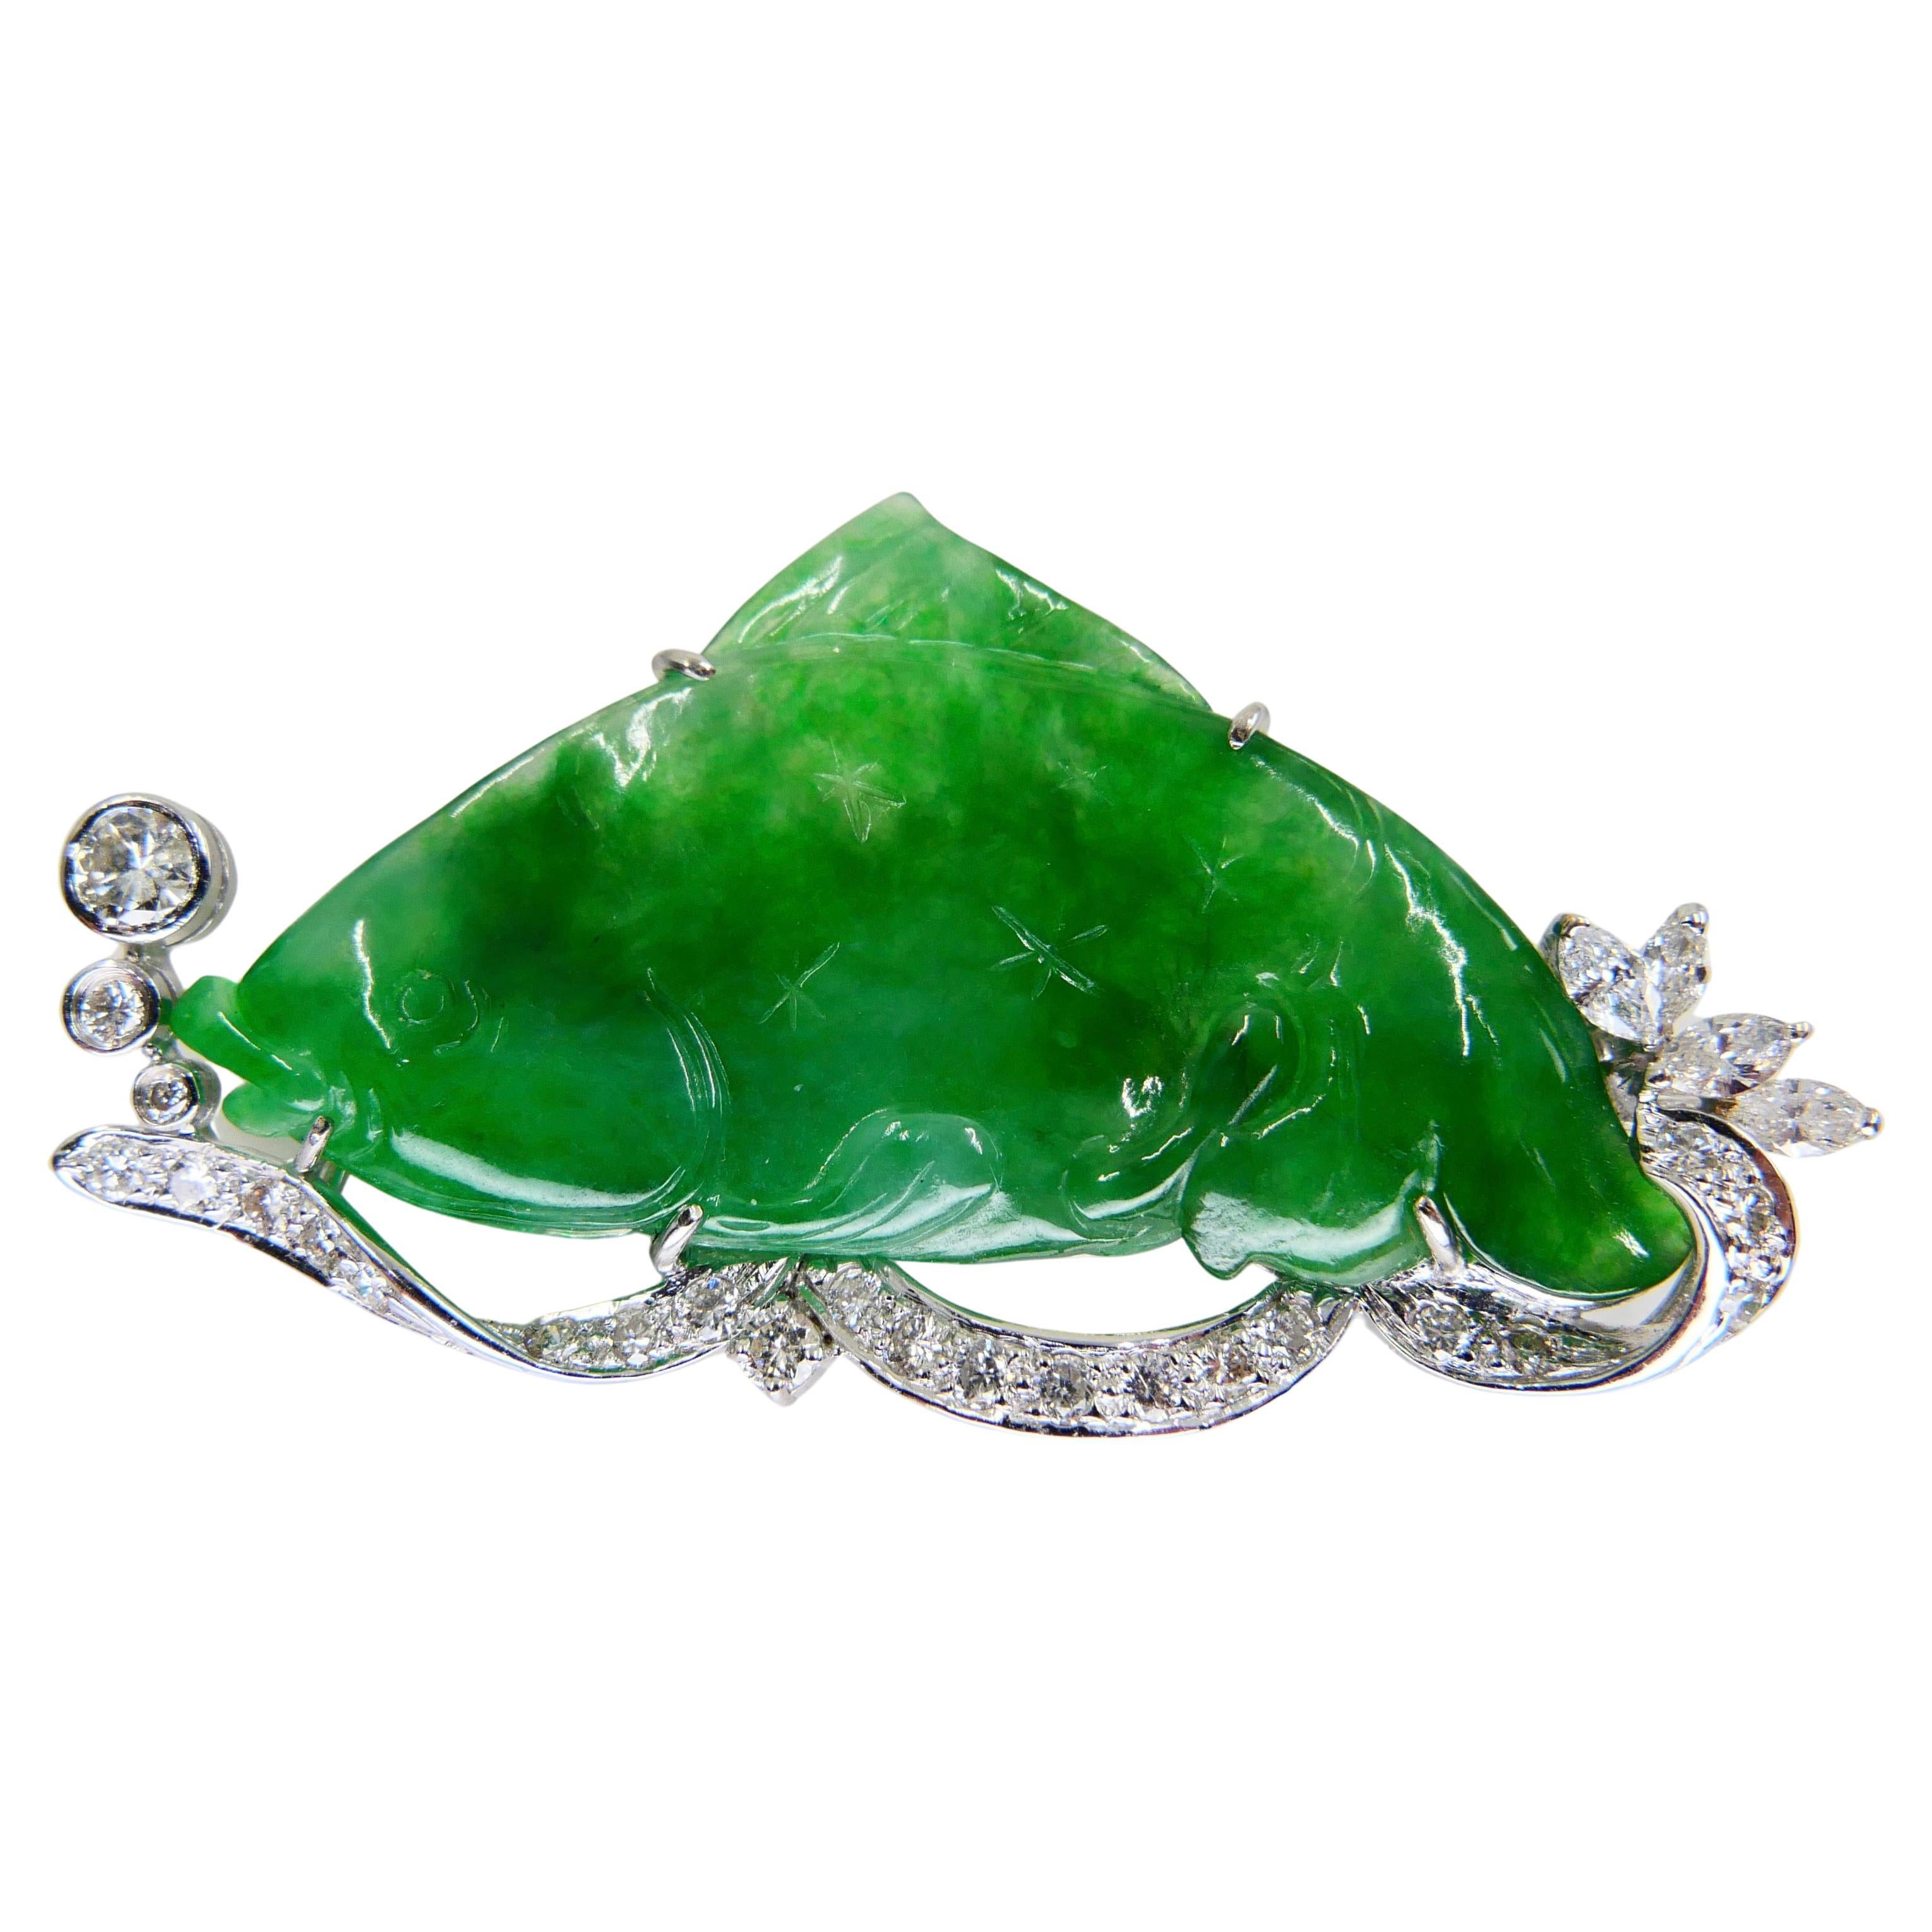 Certified Apple Green Carved Fish Jade & Diamond Brooch, Symbolizes Wealth For Sale